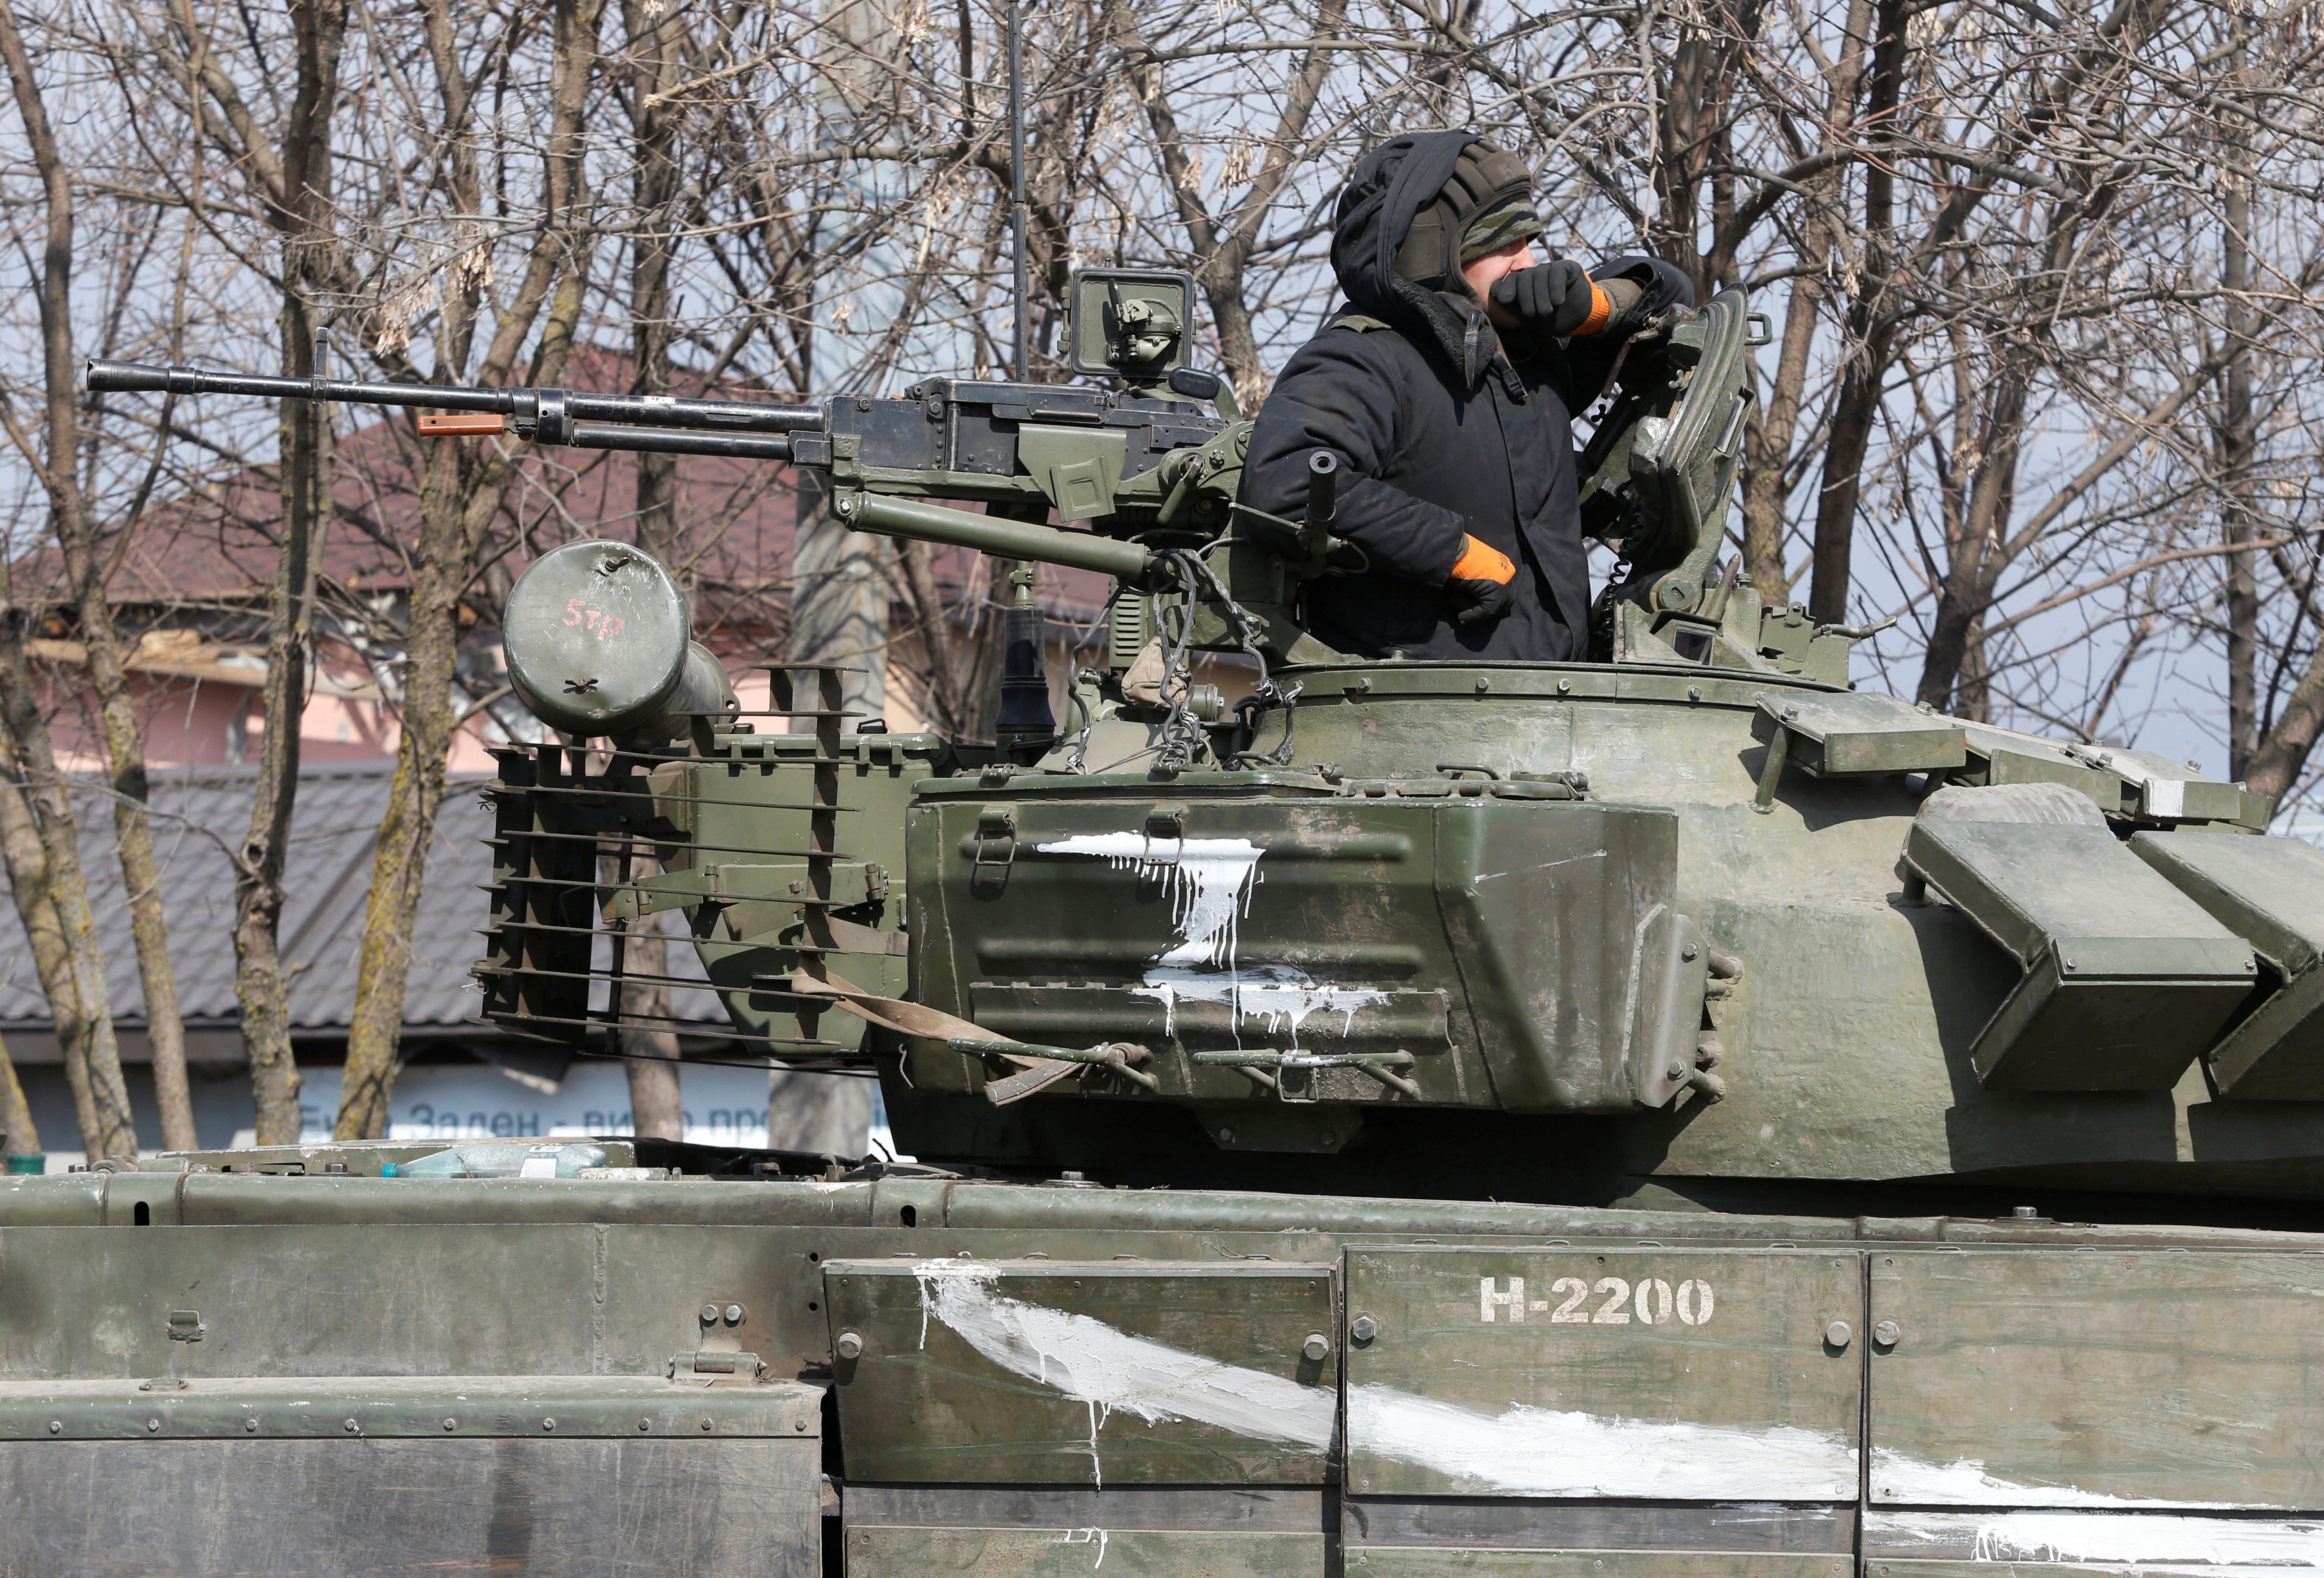 A service member of pro-Russian troops is seen atop of a tank in the besieged city of Mariupol